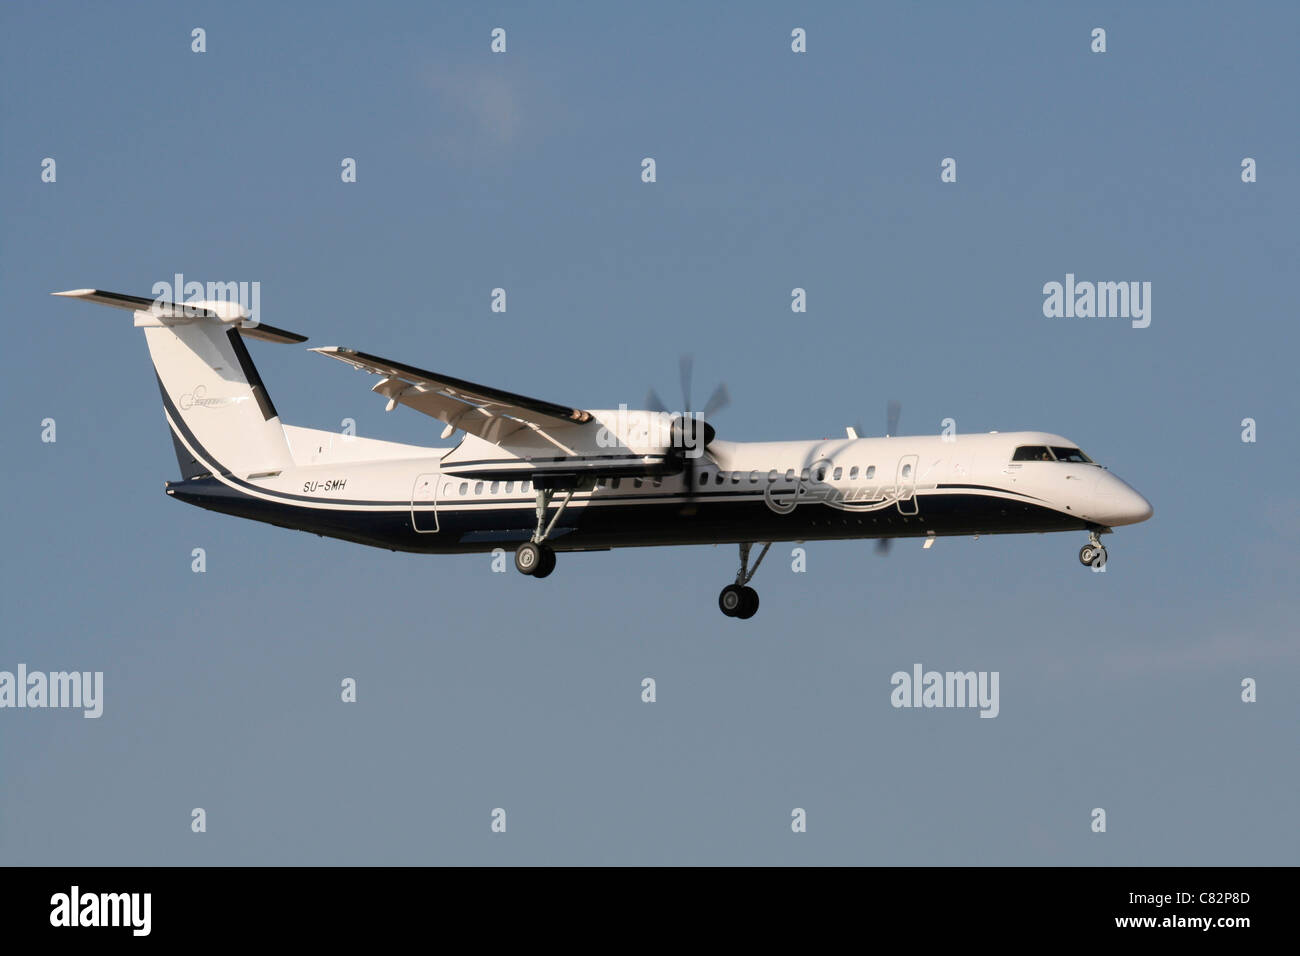 Bombardier Dash 8-Q400 prop powered airliner operated by Smart Aviation of Egypt Stock Photo